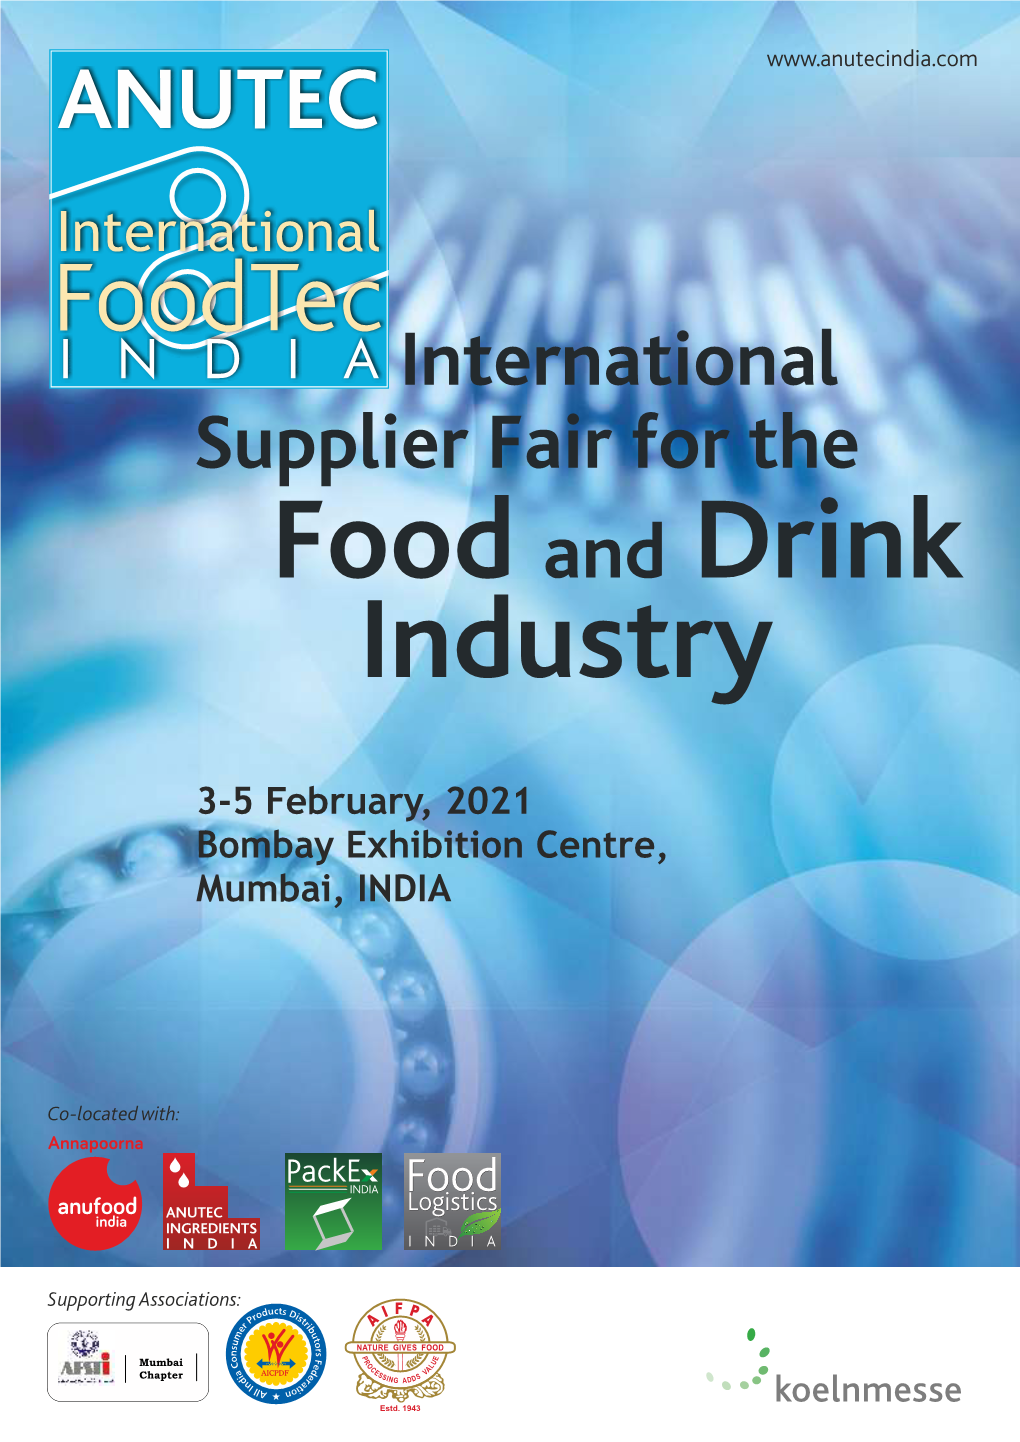 The Trade Fair Dairy Drink 15% 12% FMCG Choose the Right Platform to Meet Your Customers 14%